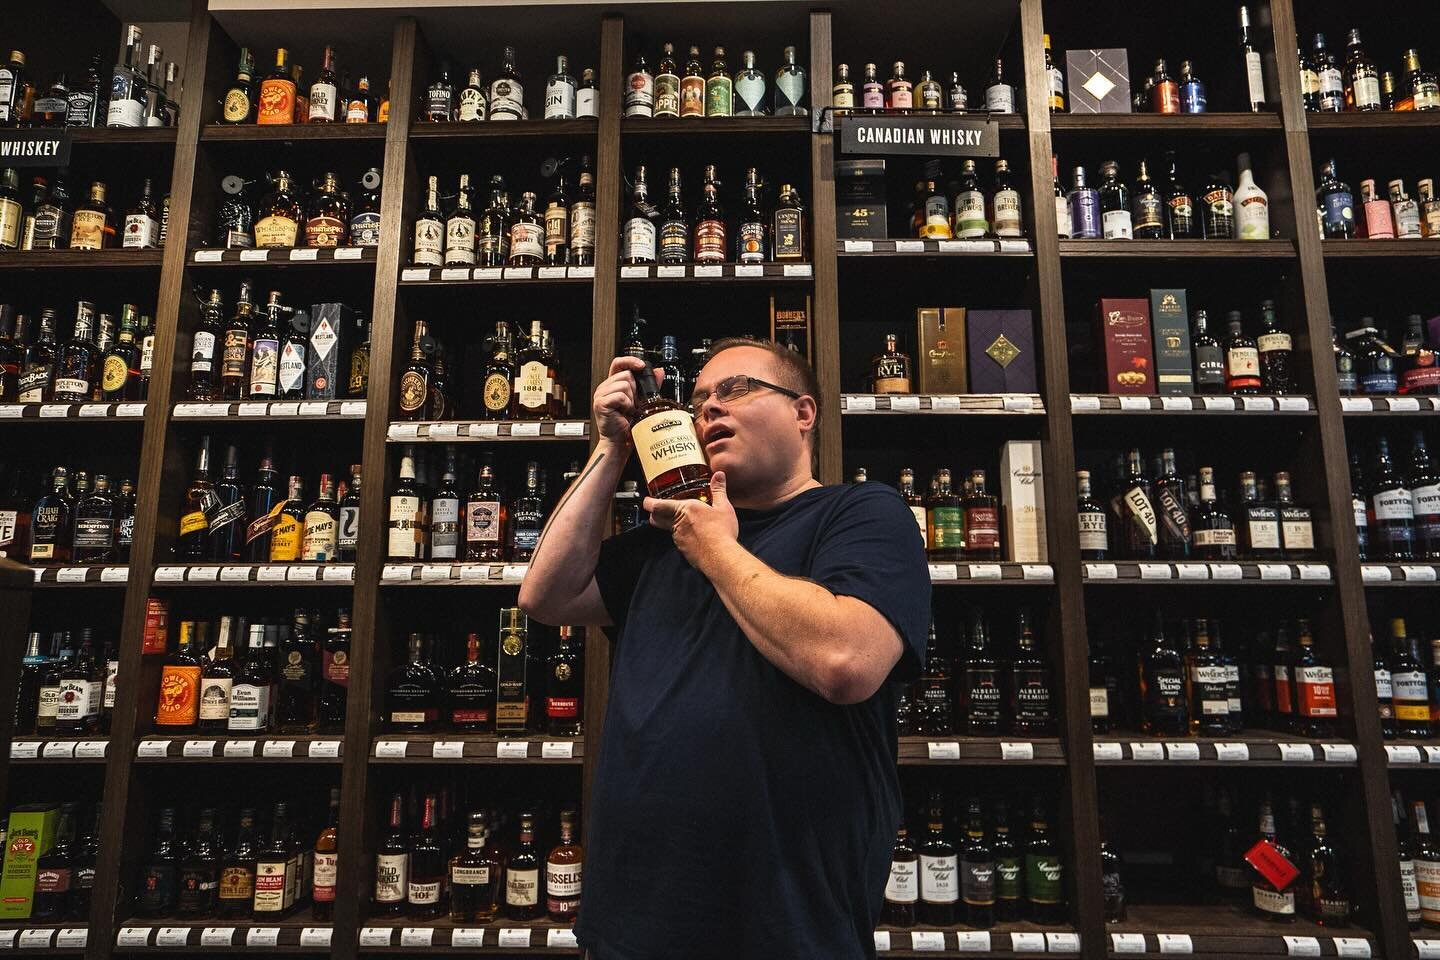 Distillers sure do love their products 😜 

Distiller/Blender Scott Thompson seen here appreciating our gold medal winning Canadian single malt 🥰

#lookinggood #premium #thegoodlife #whiskylover #yvrwhisky #canadianwhisky #yvrdrinks #vancouverwhisky